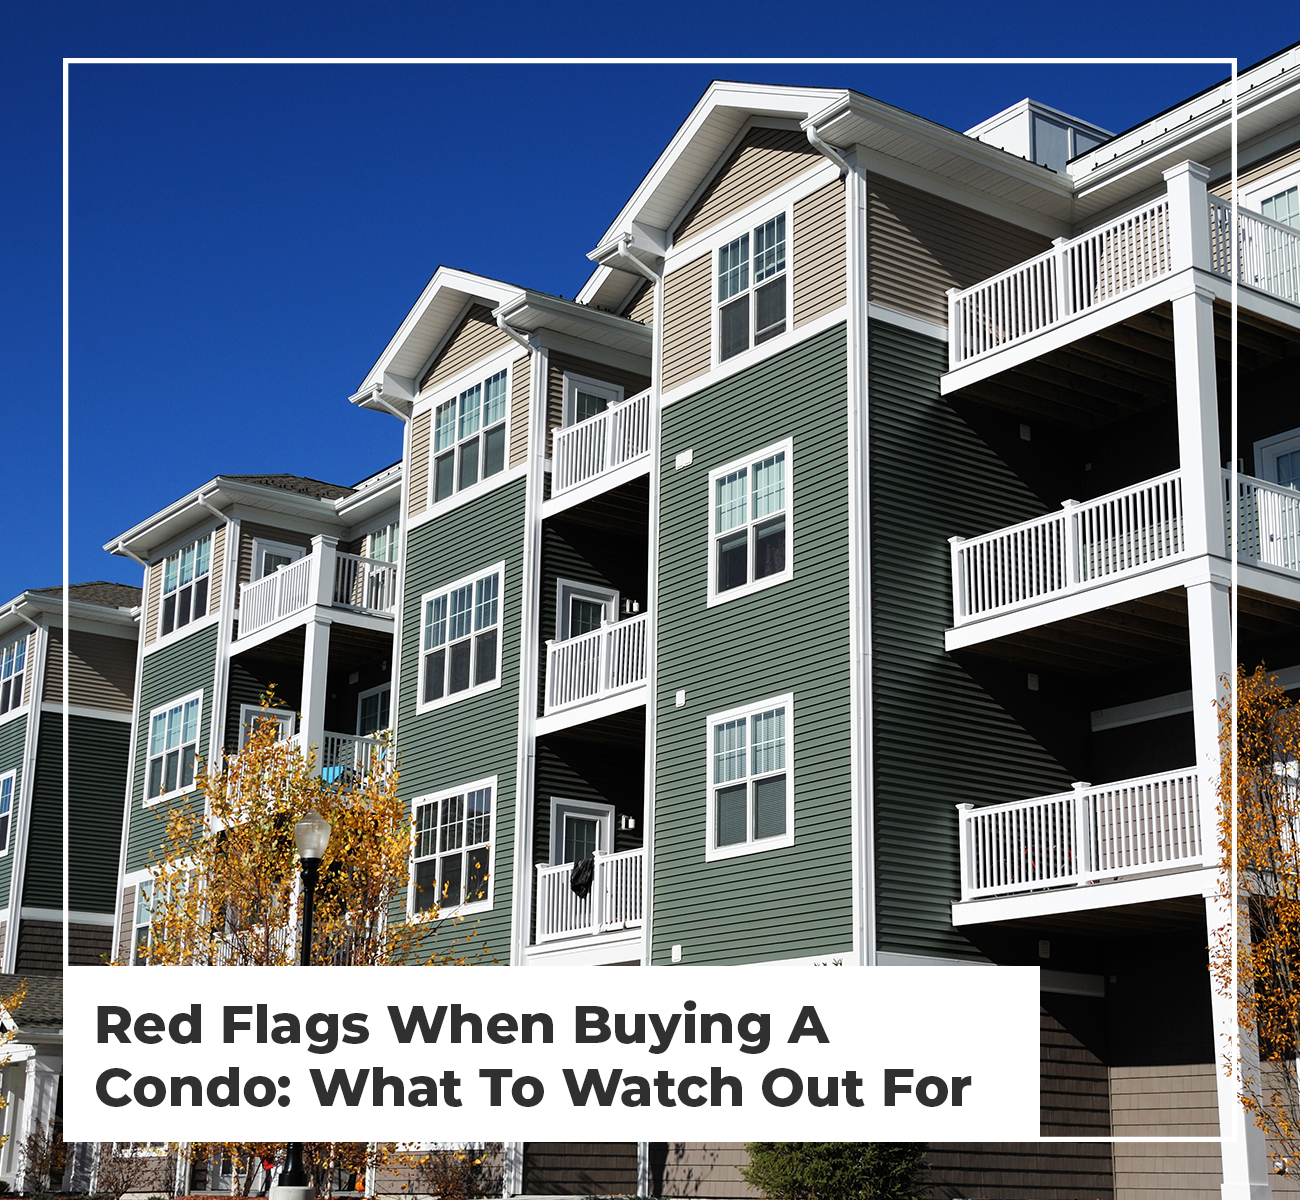 Red Flags When Buying A Condo: What To Watch Out For - Main Image